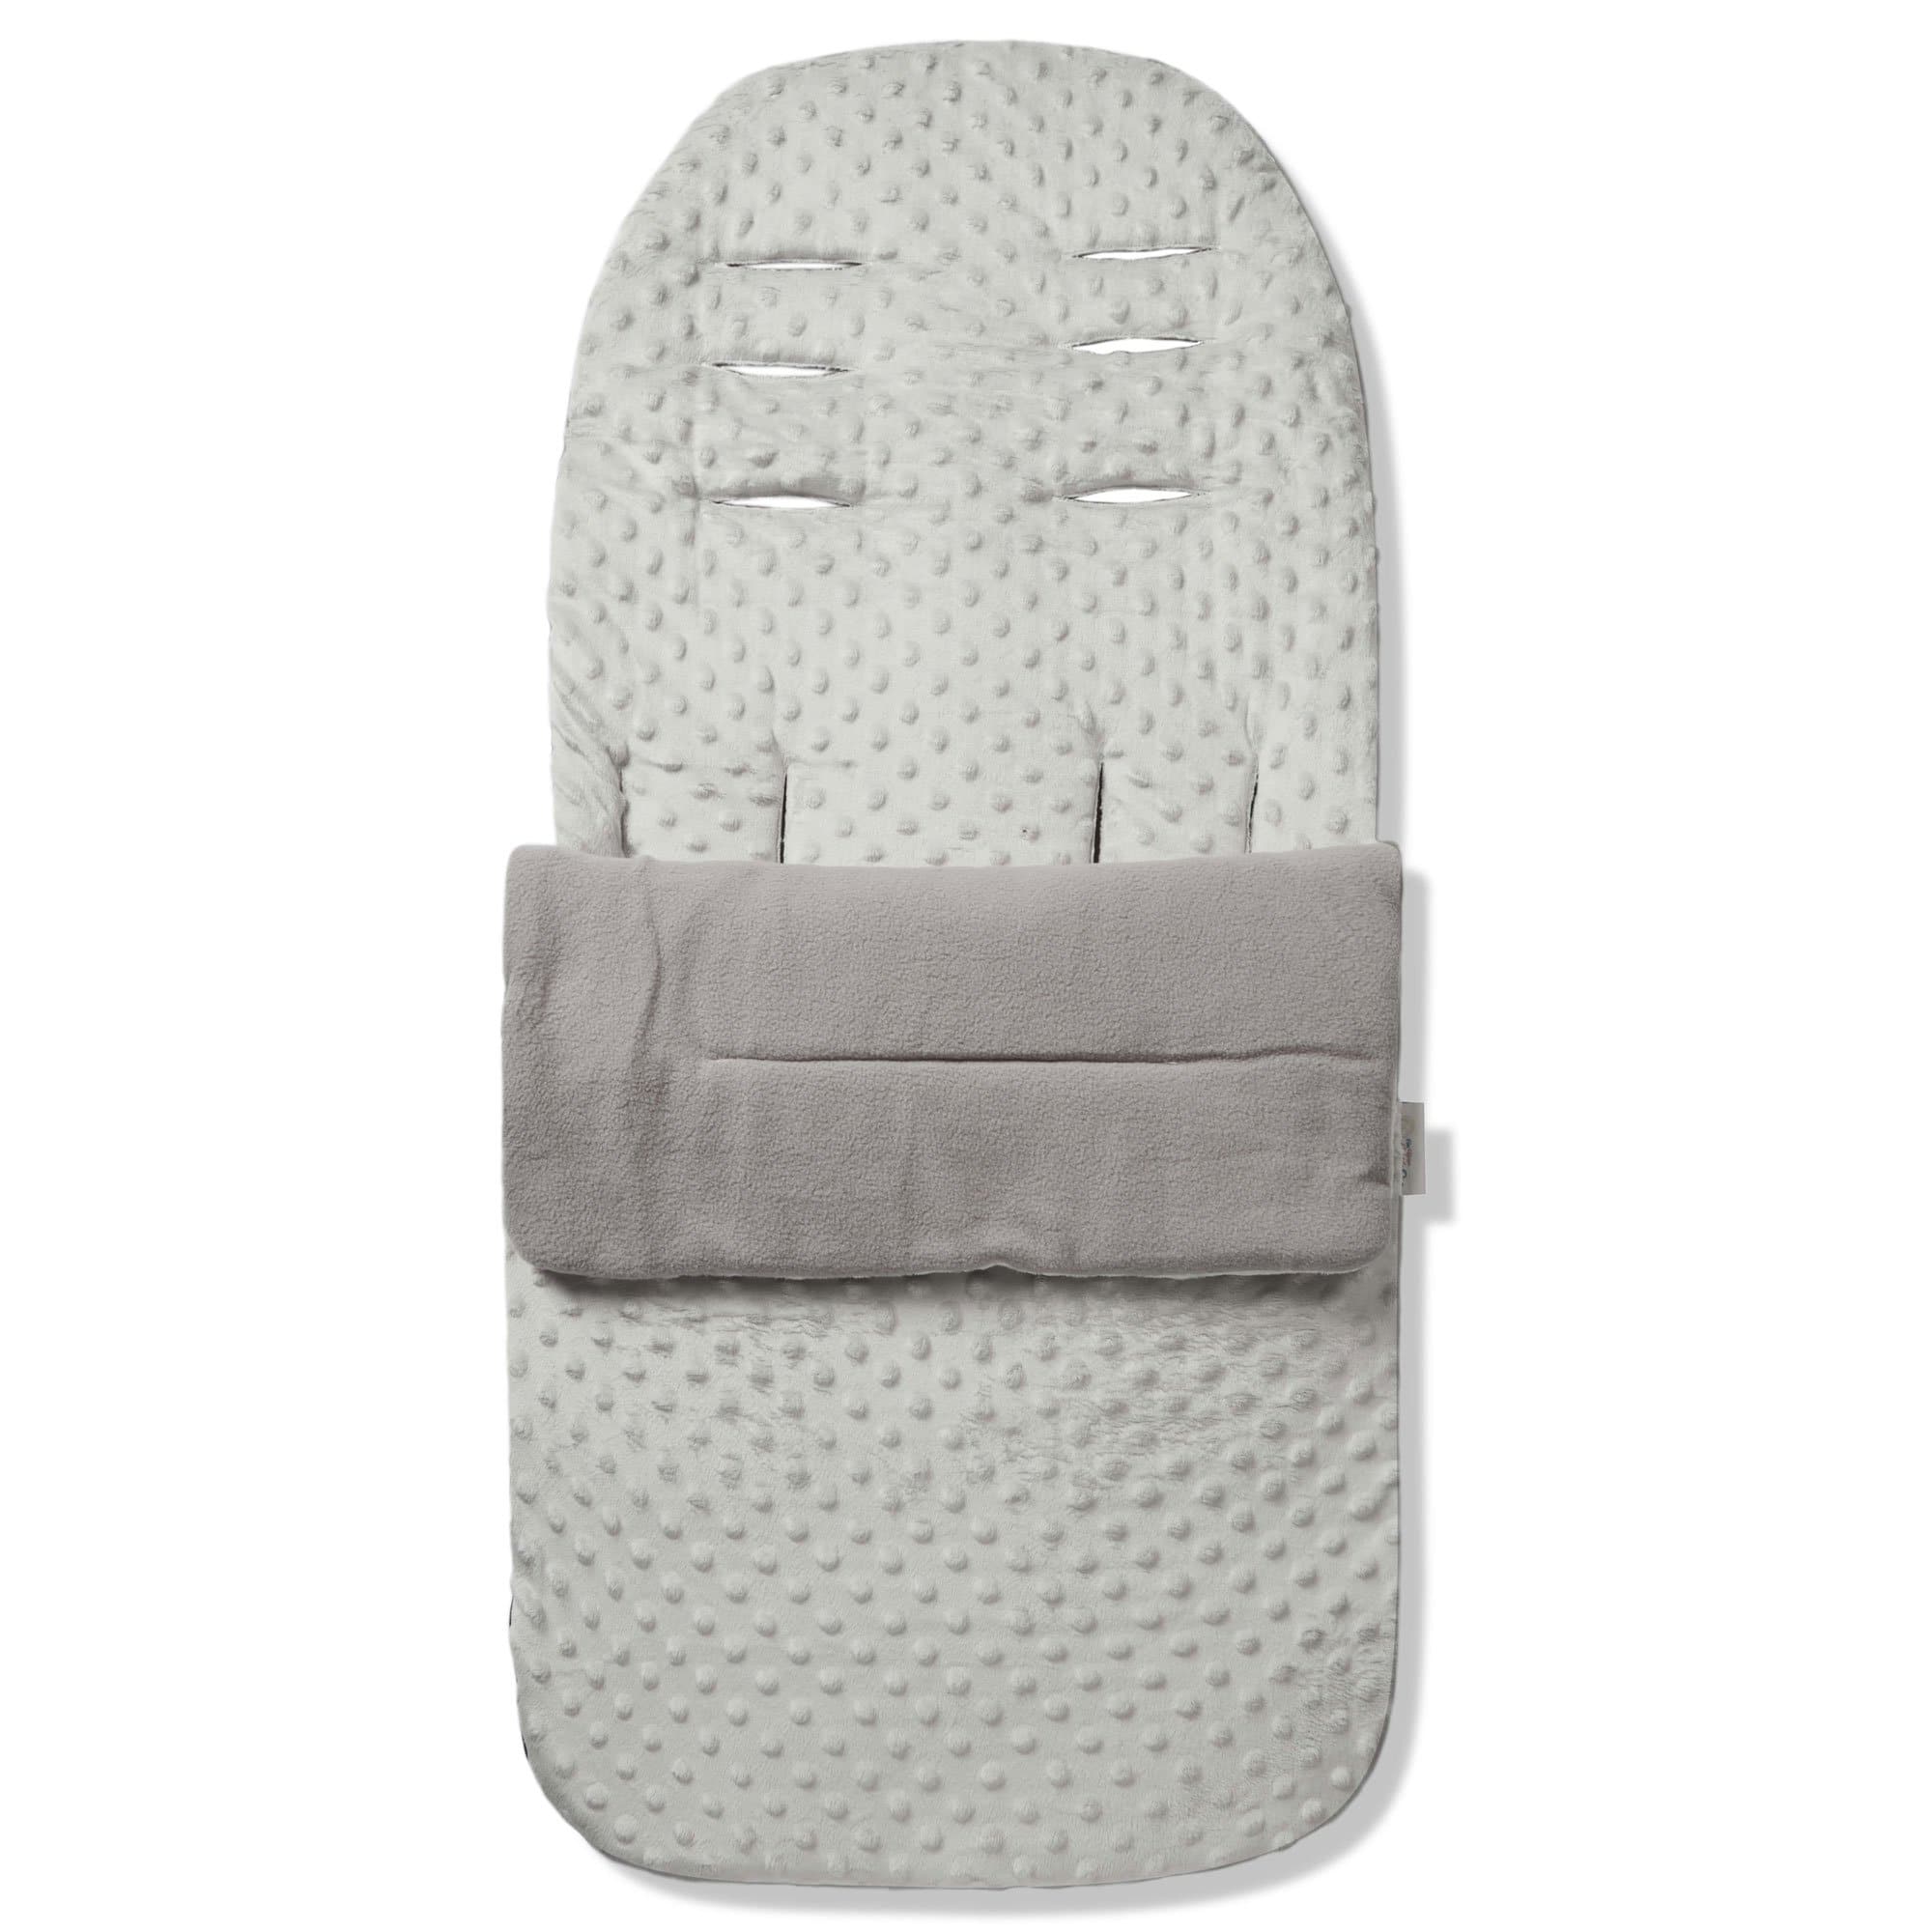 Dimple Footmuff / Cosy Toes Compatible with BabyCare - Grey / Fits All Models | For Your Little One